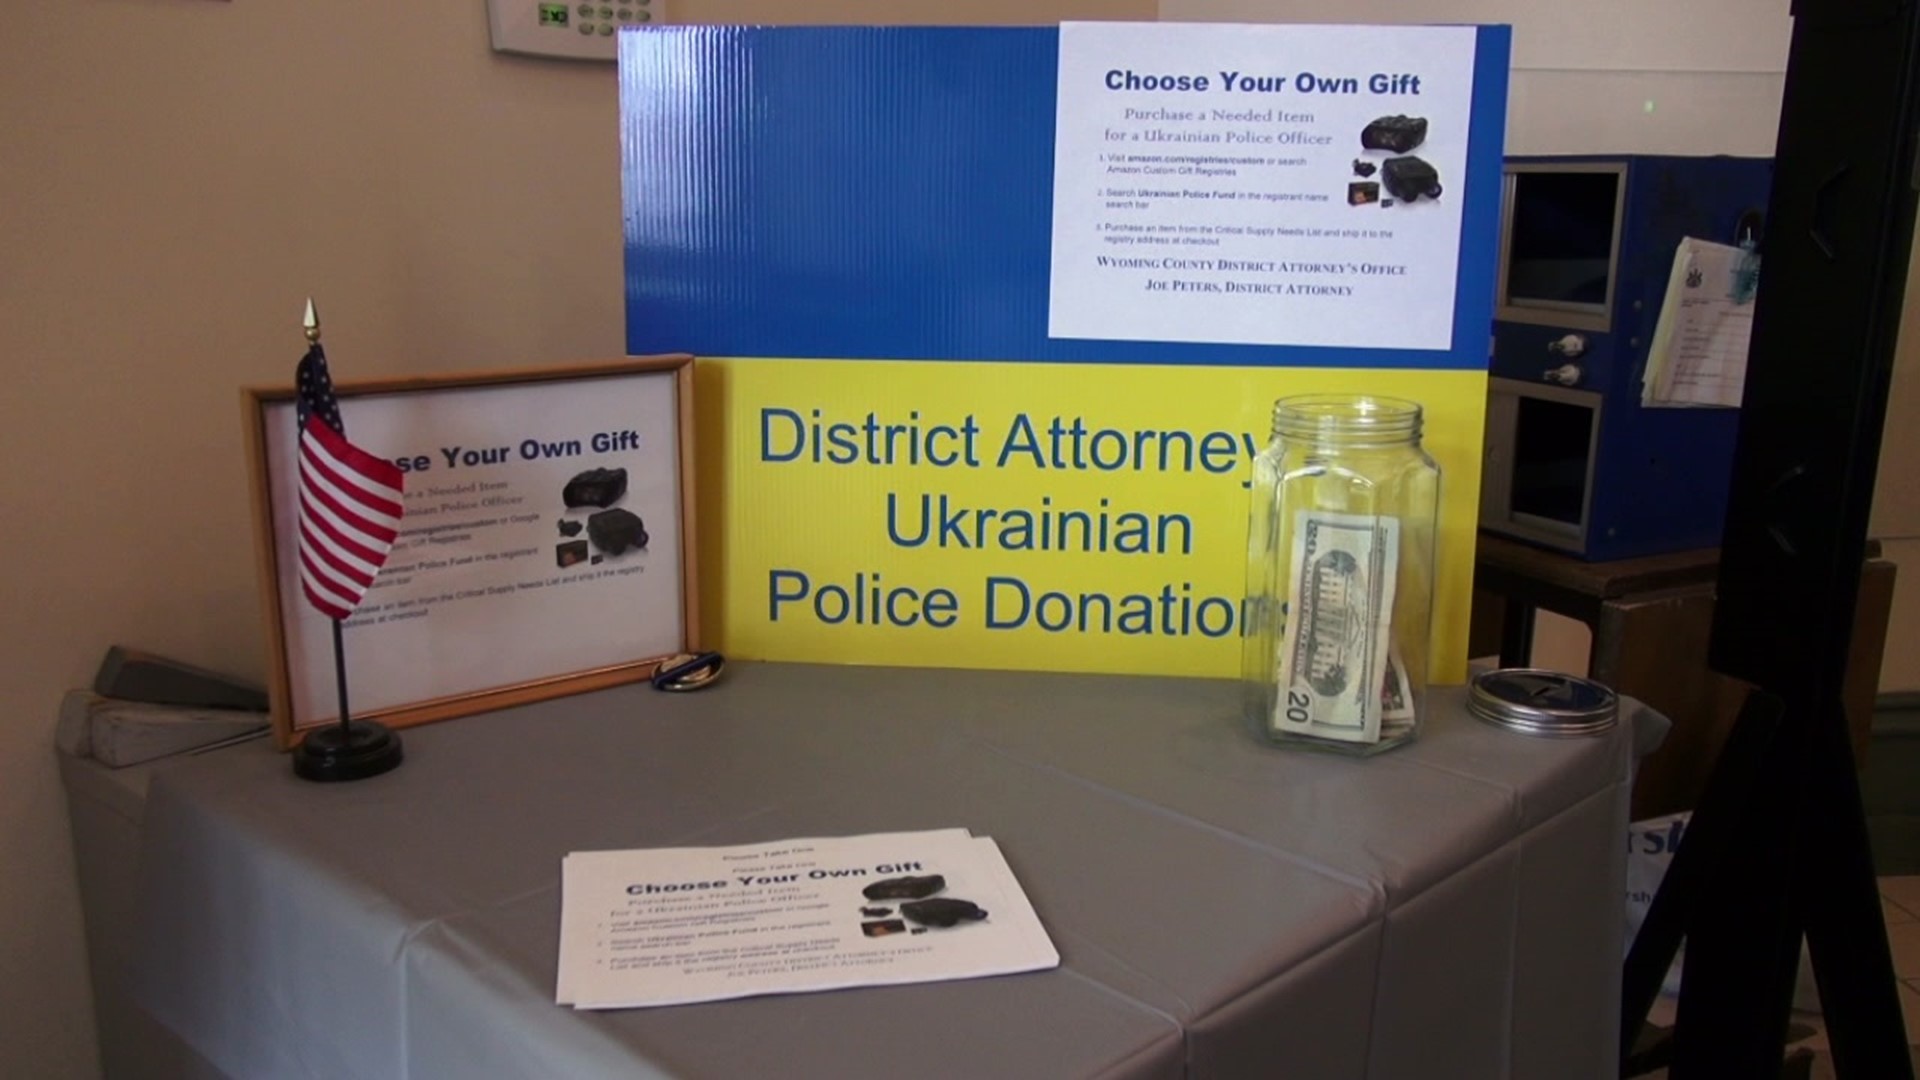 District Attorney Joe Peters has announced an effort to raise funds to buy tactical items for Ukrainian police officers.